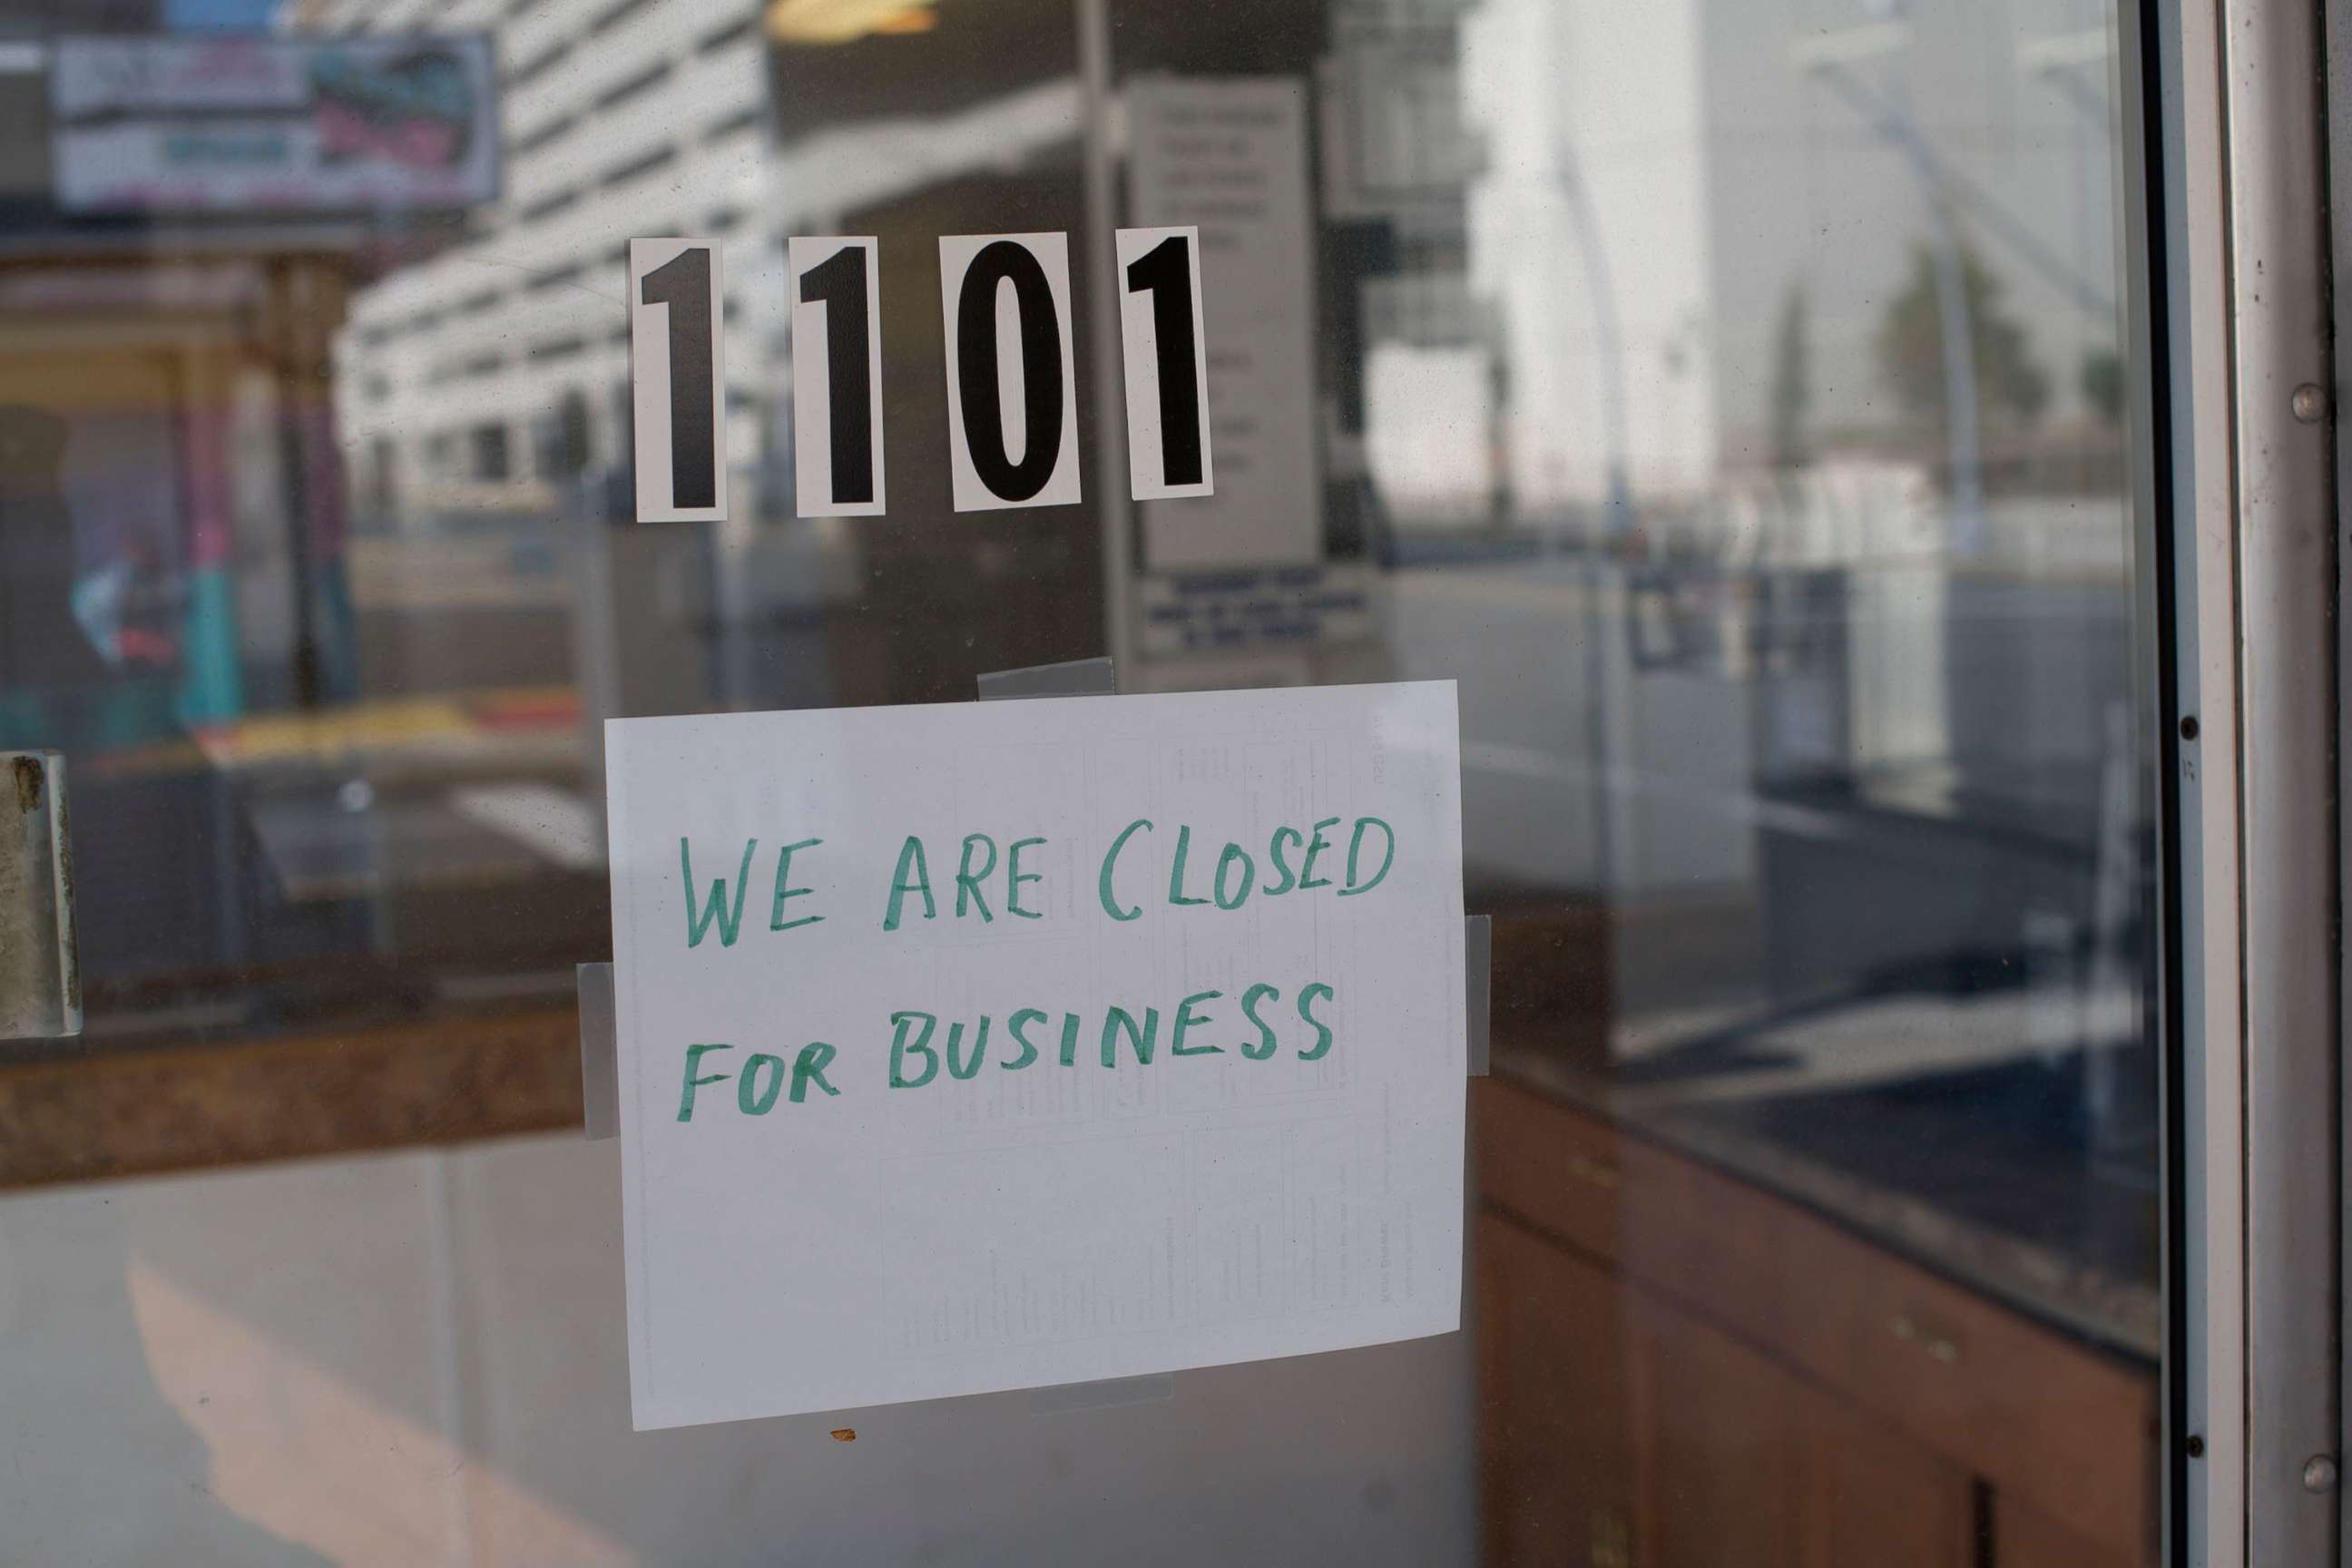 PHOTO: In this May 7, 2020, file photo, a sign at a motel lobby states "WE ARE CLOSED FOR BUSINESS" during the coronavirus pandemic in Atlantic City, N.J.